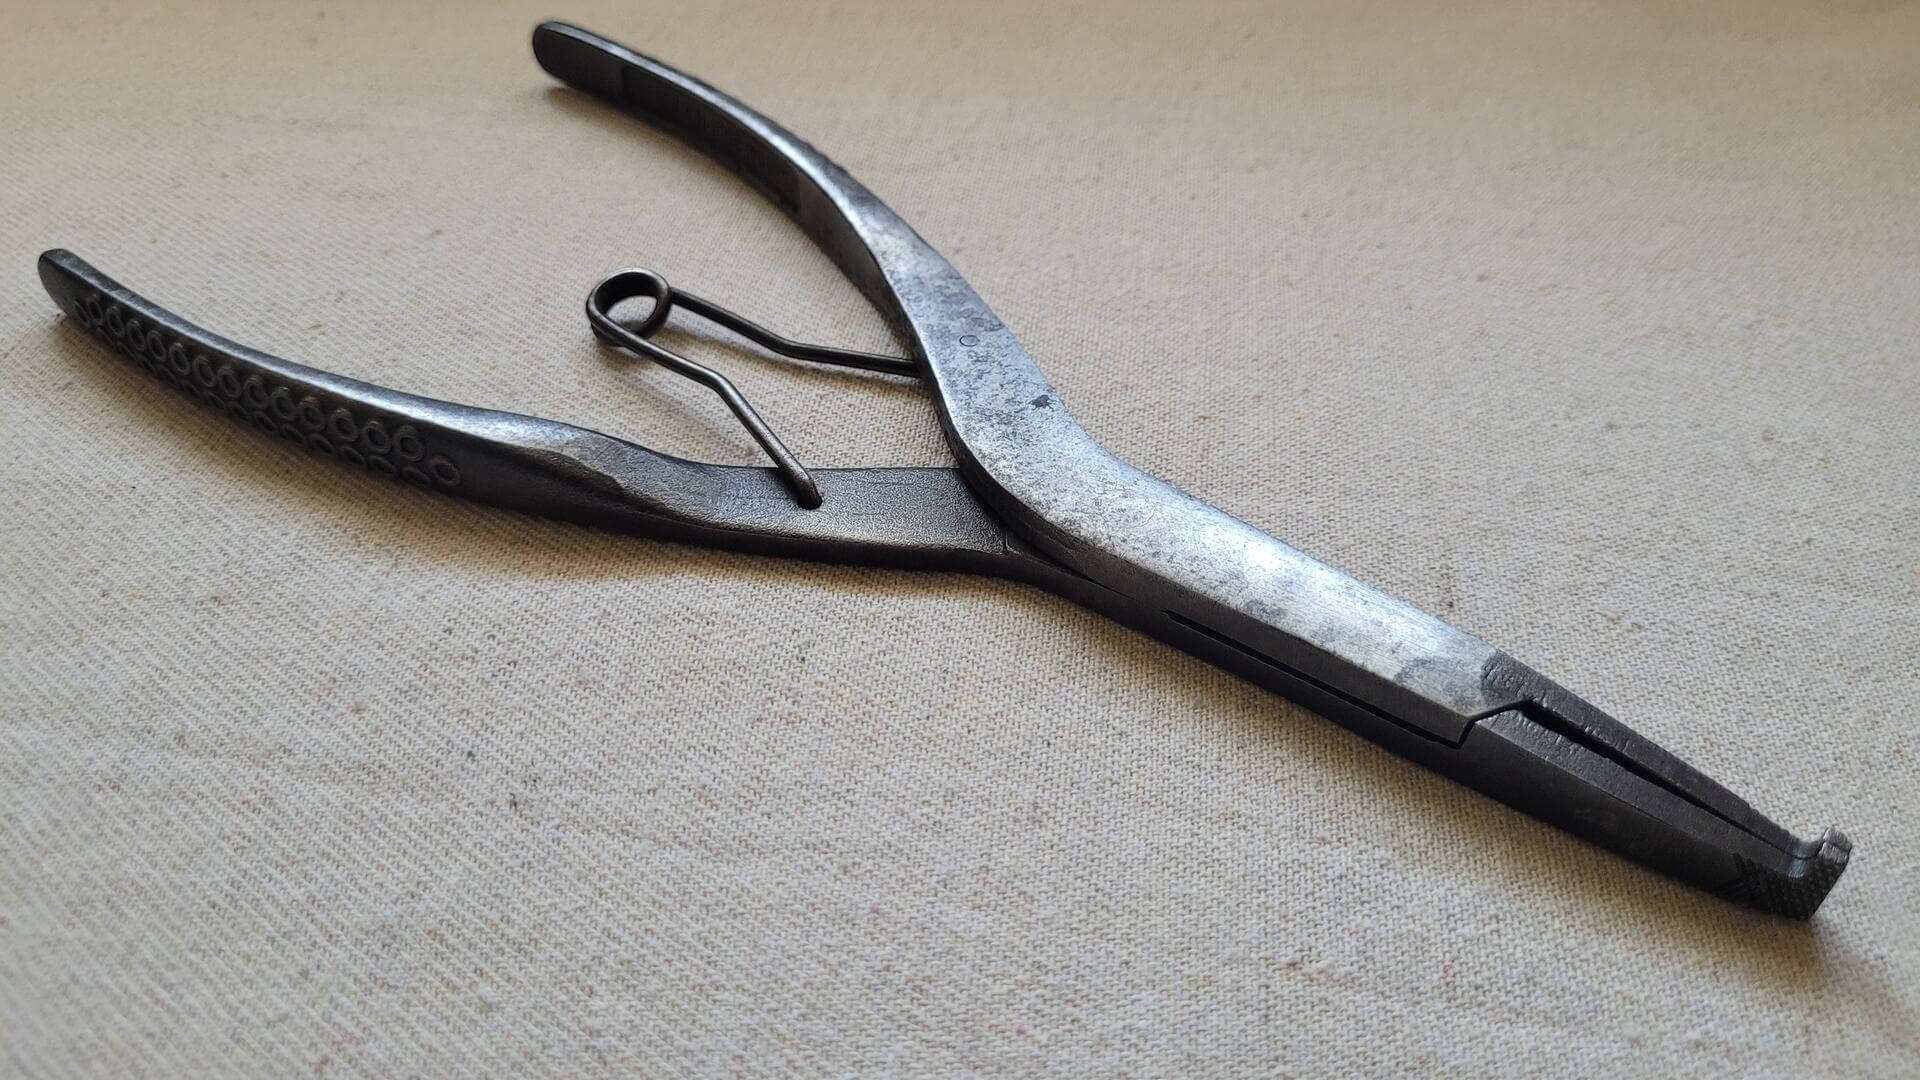 Beautiful vintage Forged Steel Products Company Vacuum Grip No. 70-A retaining grip pliers with patterned handles. Antique made in USA collectible specialty mechanic tool that was sold under the Snap-on Tools brand